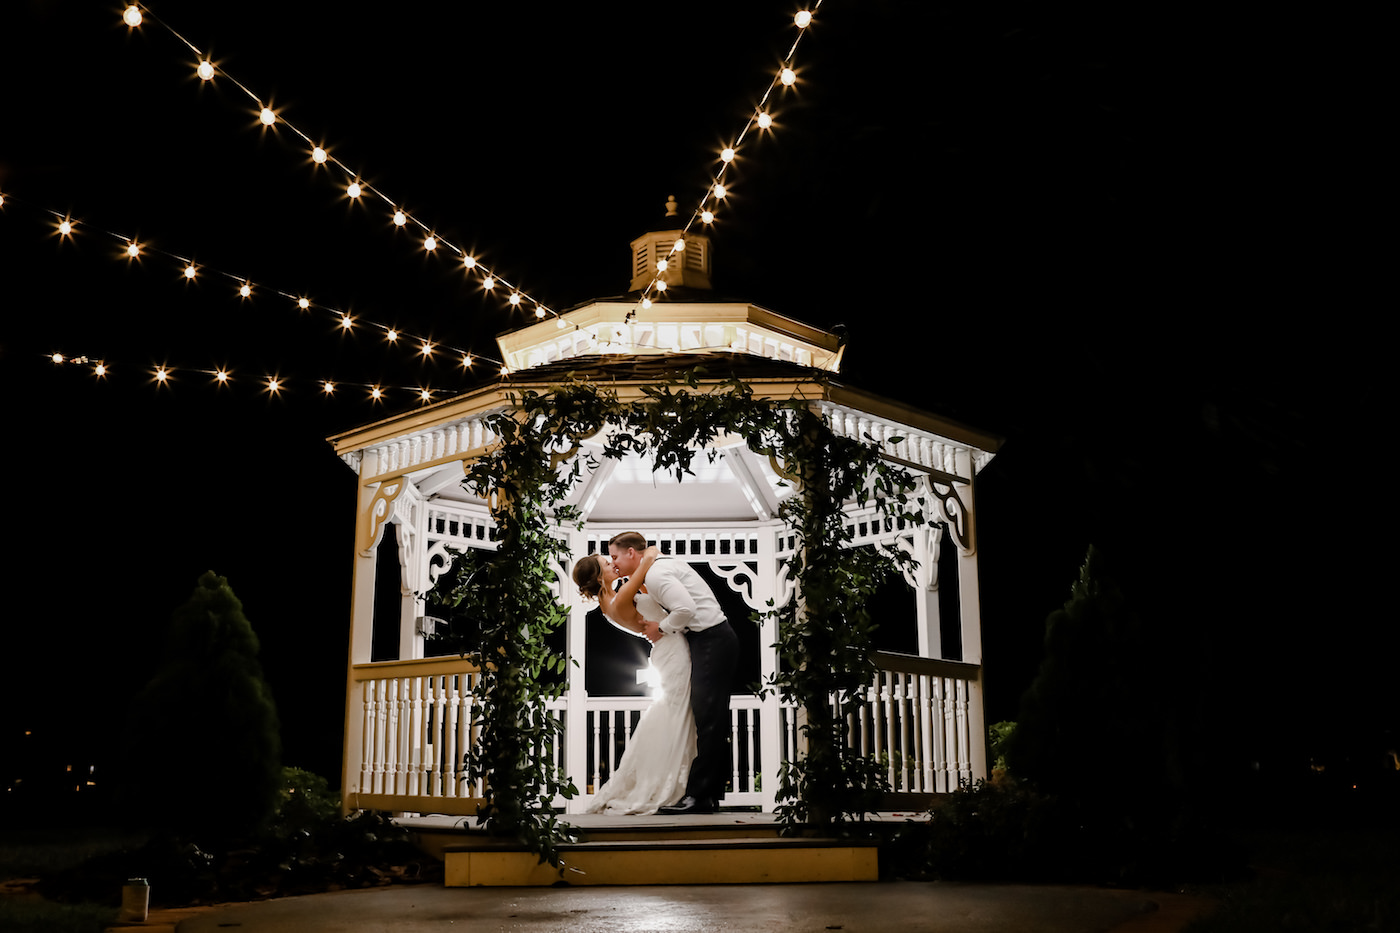 Romantic Intimate Bride and Groom NIghttime Wedding Portrait Under White Gazebo with Greenery Arch and String Lights | Wedding Photographer Lifelong Photography Studio | Tampa Wedding Planner Blue Skies Weddings and Events | Waterfront Wedding Venue Davis Islands Garden Club